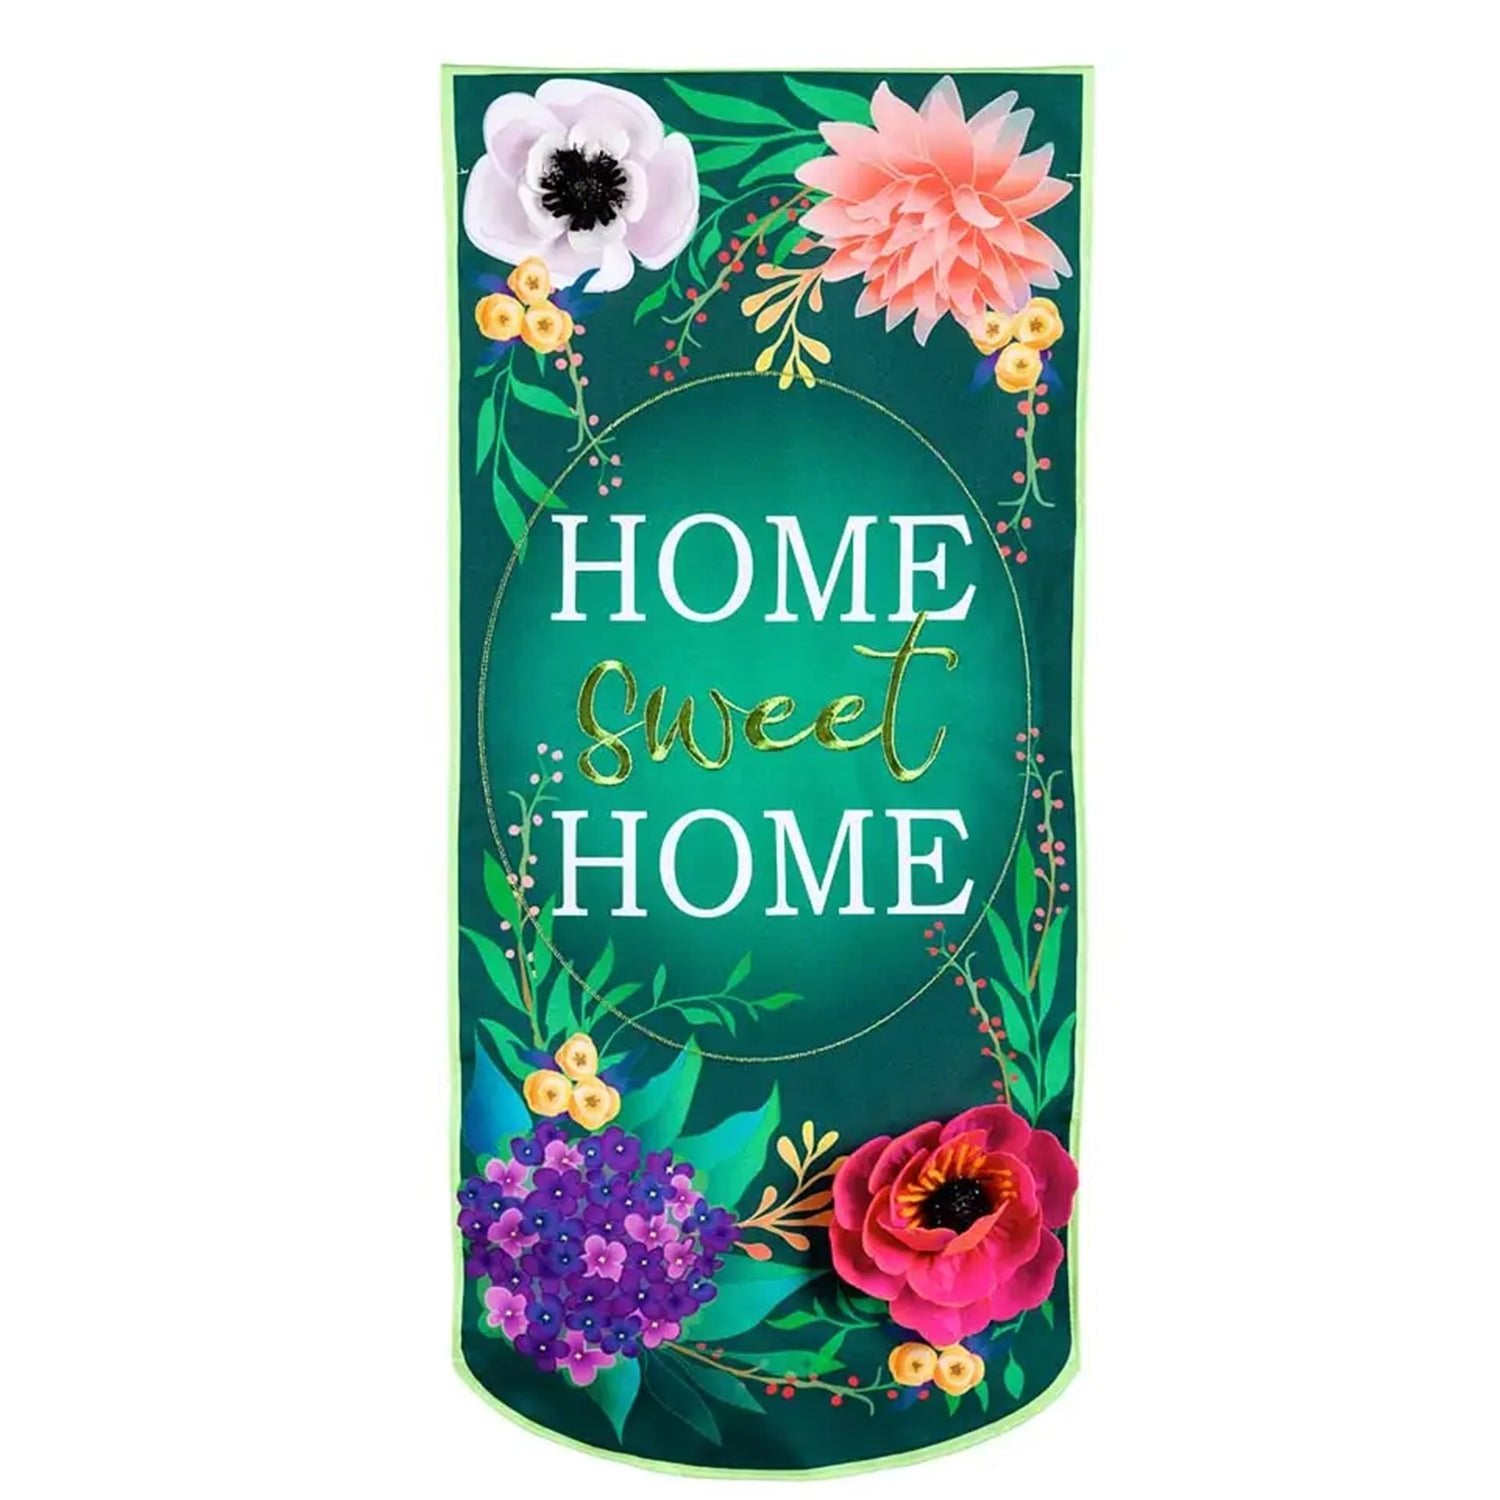 Fall Floral Home Sweet Home Everlasting Impressions Textile Decor